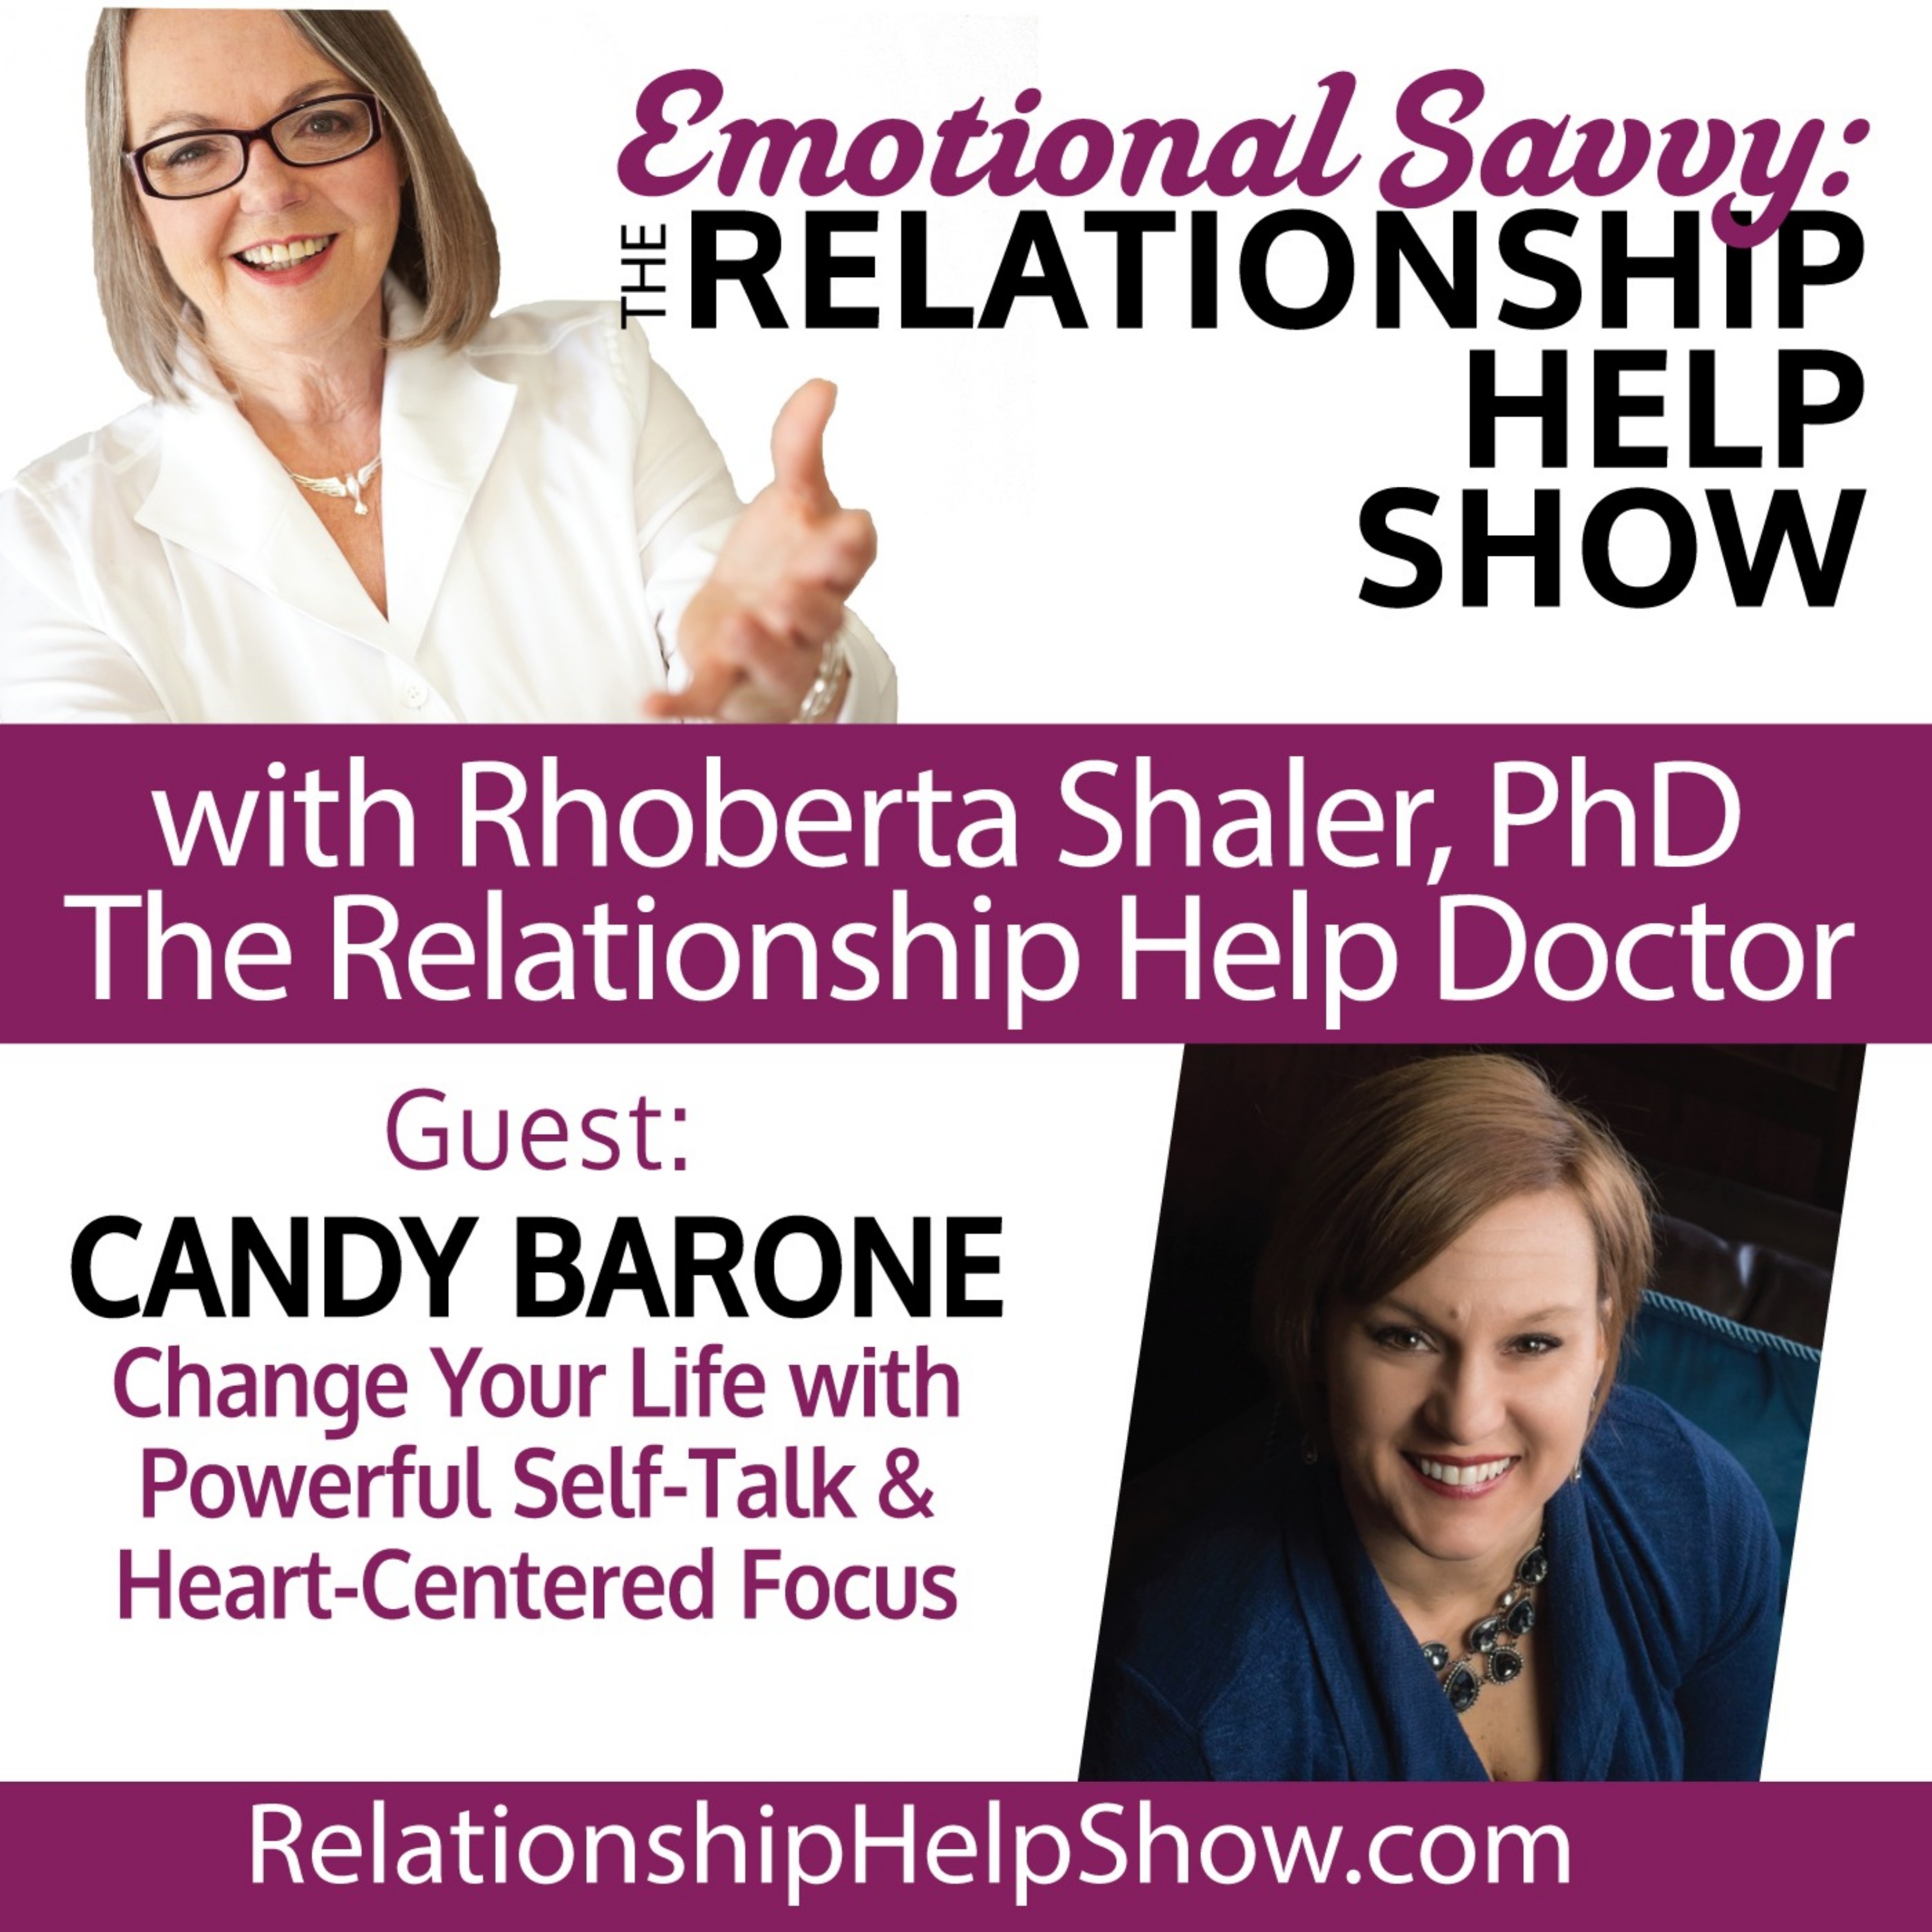 Change Your Life with Powerful Self-Talk & Heart-Centered Focus  GUEST: Candy Barone